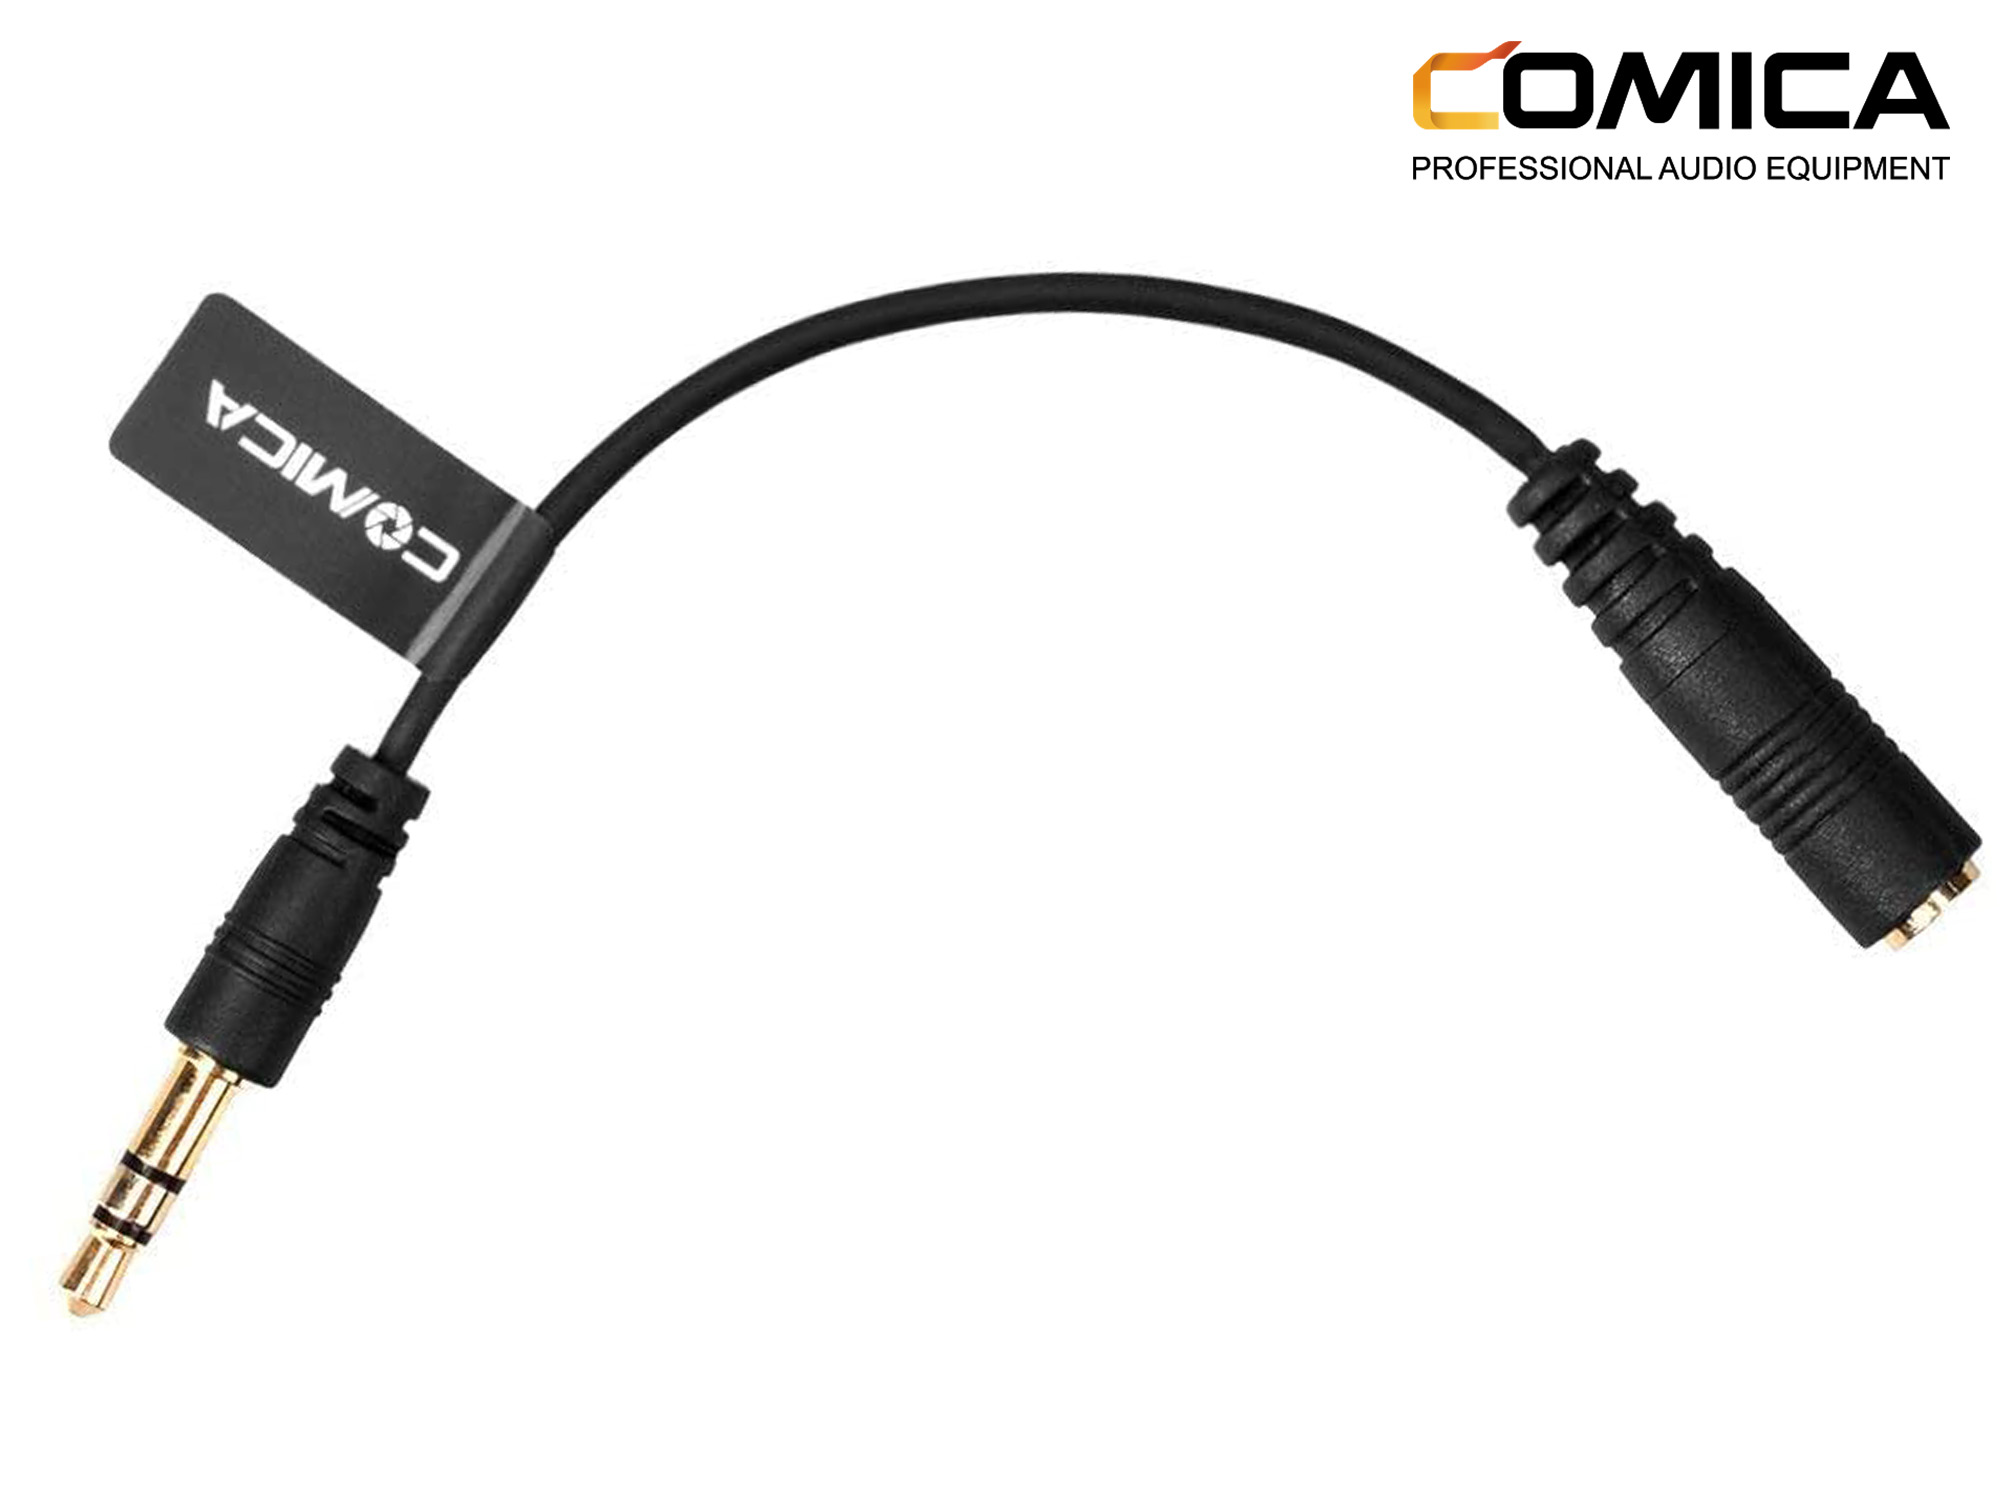 Comica Audio TRRS-TRS Audio Cable Adapter For Camera